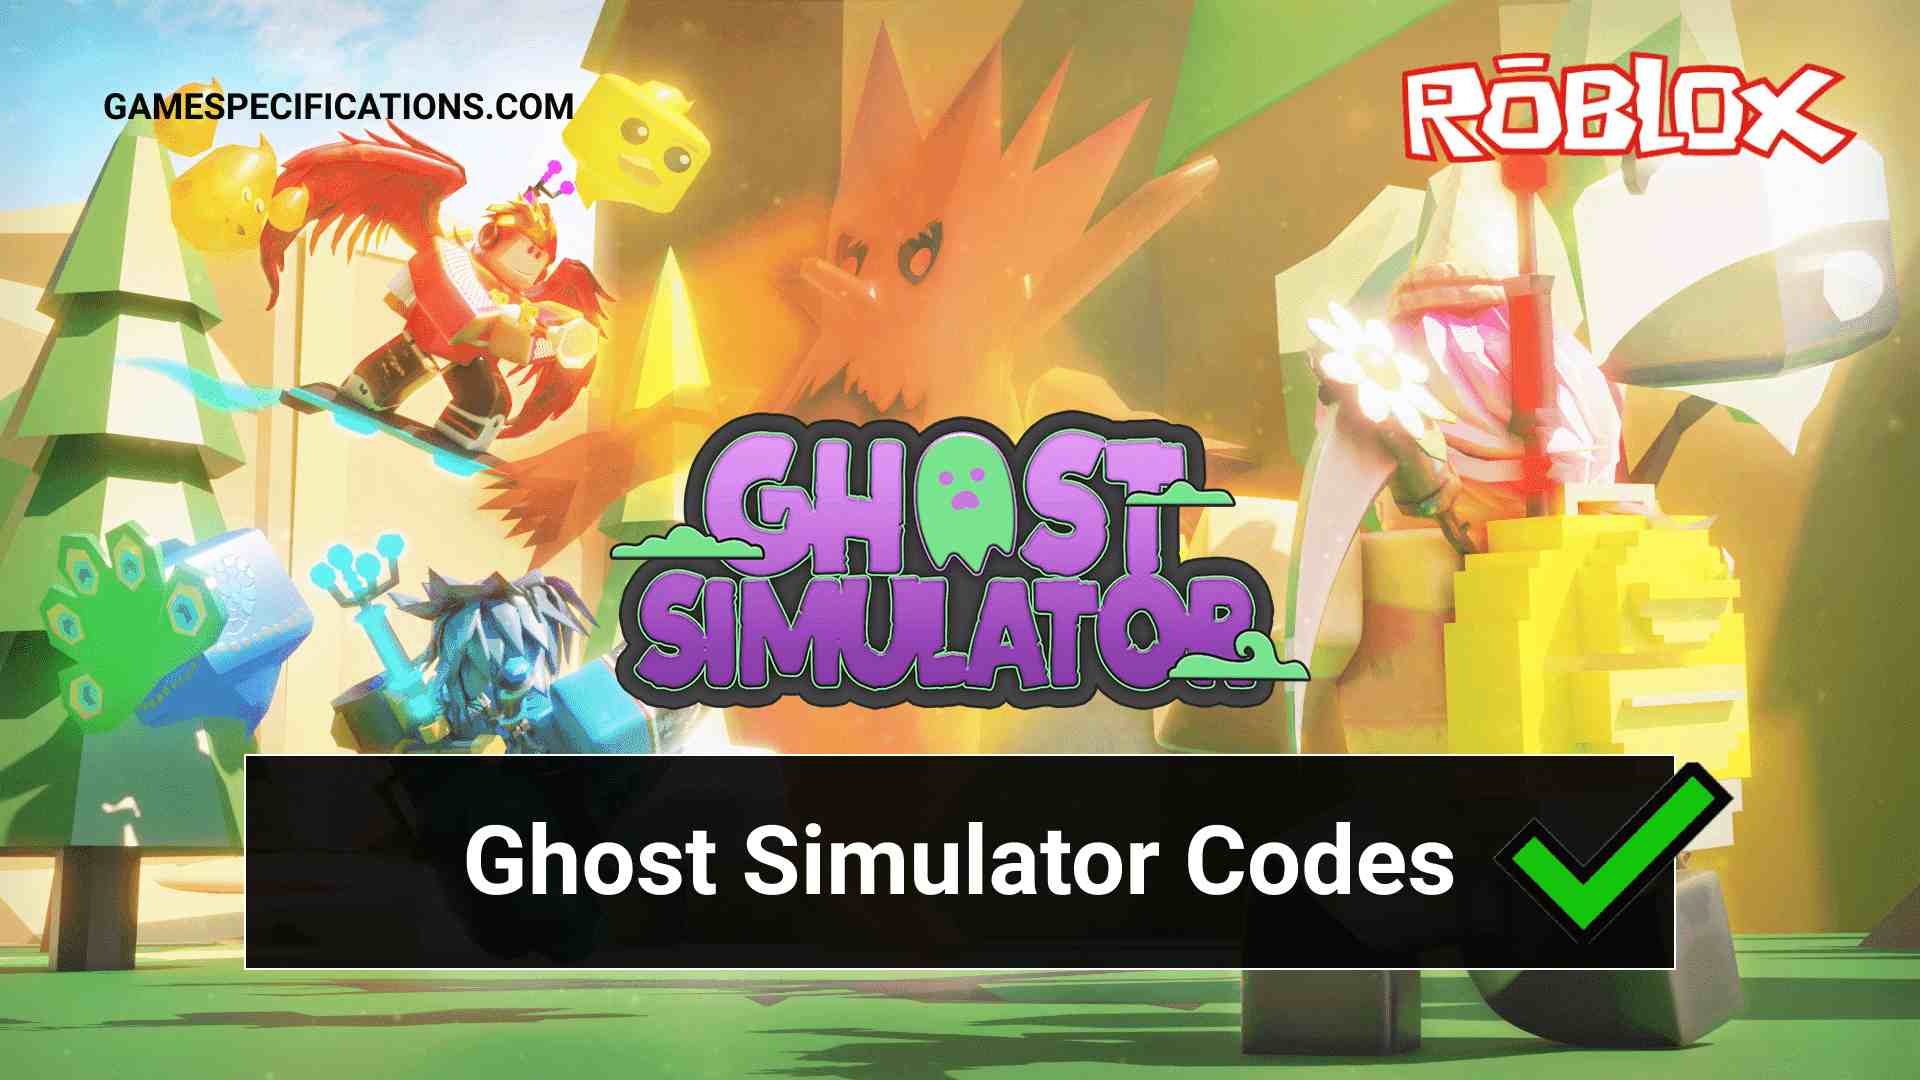 55 Roblox Ghost Simulator Codes To Get Free Rewards July 2021 Game Specifications - the flash simulator roblox